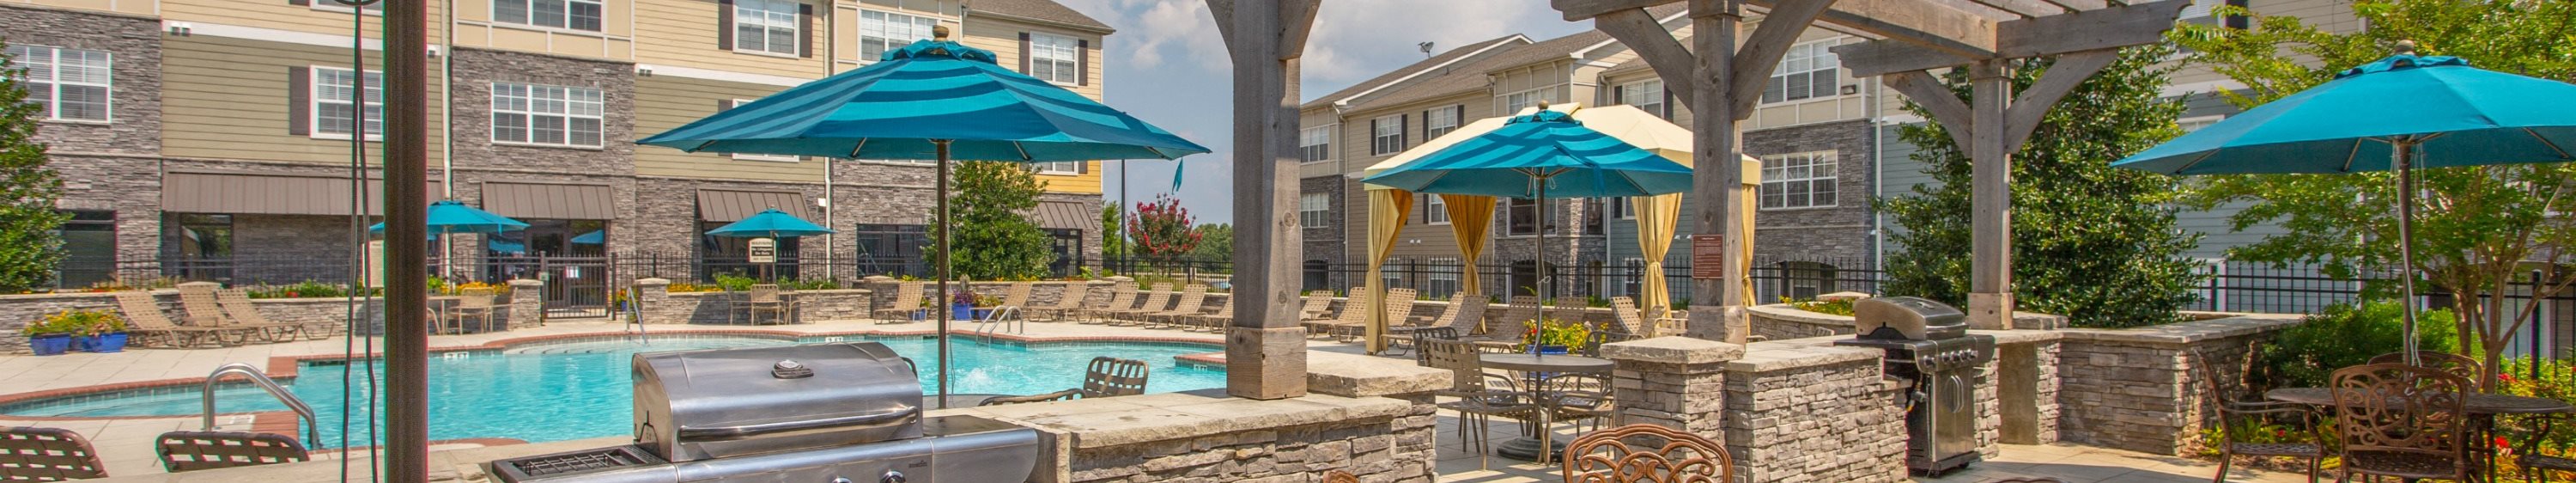 Sparkling Swimming Pool at Amberleigh Ridge Apartments in Chattanooga, TN